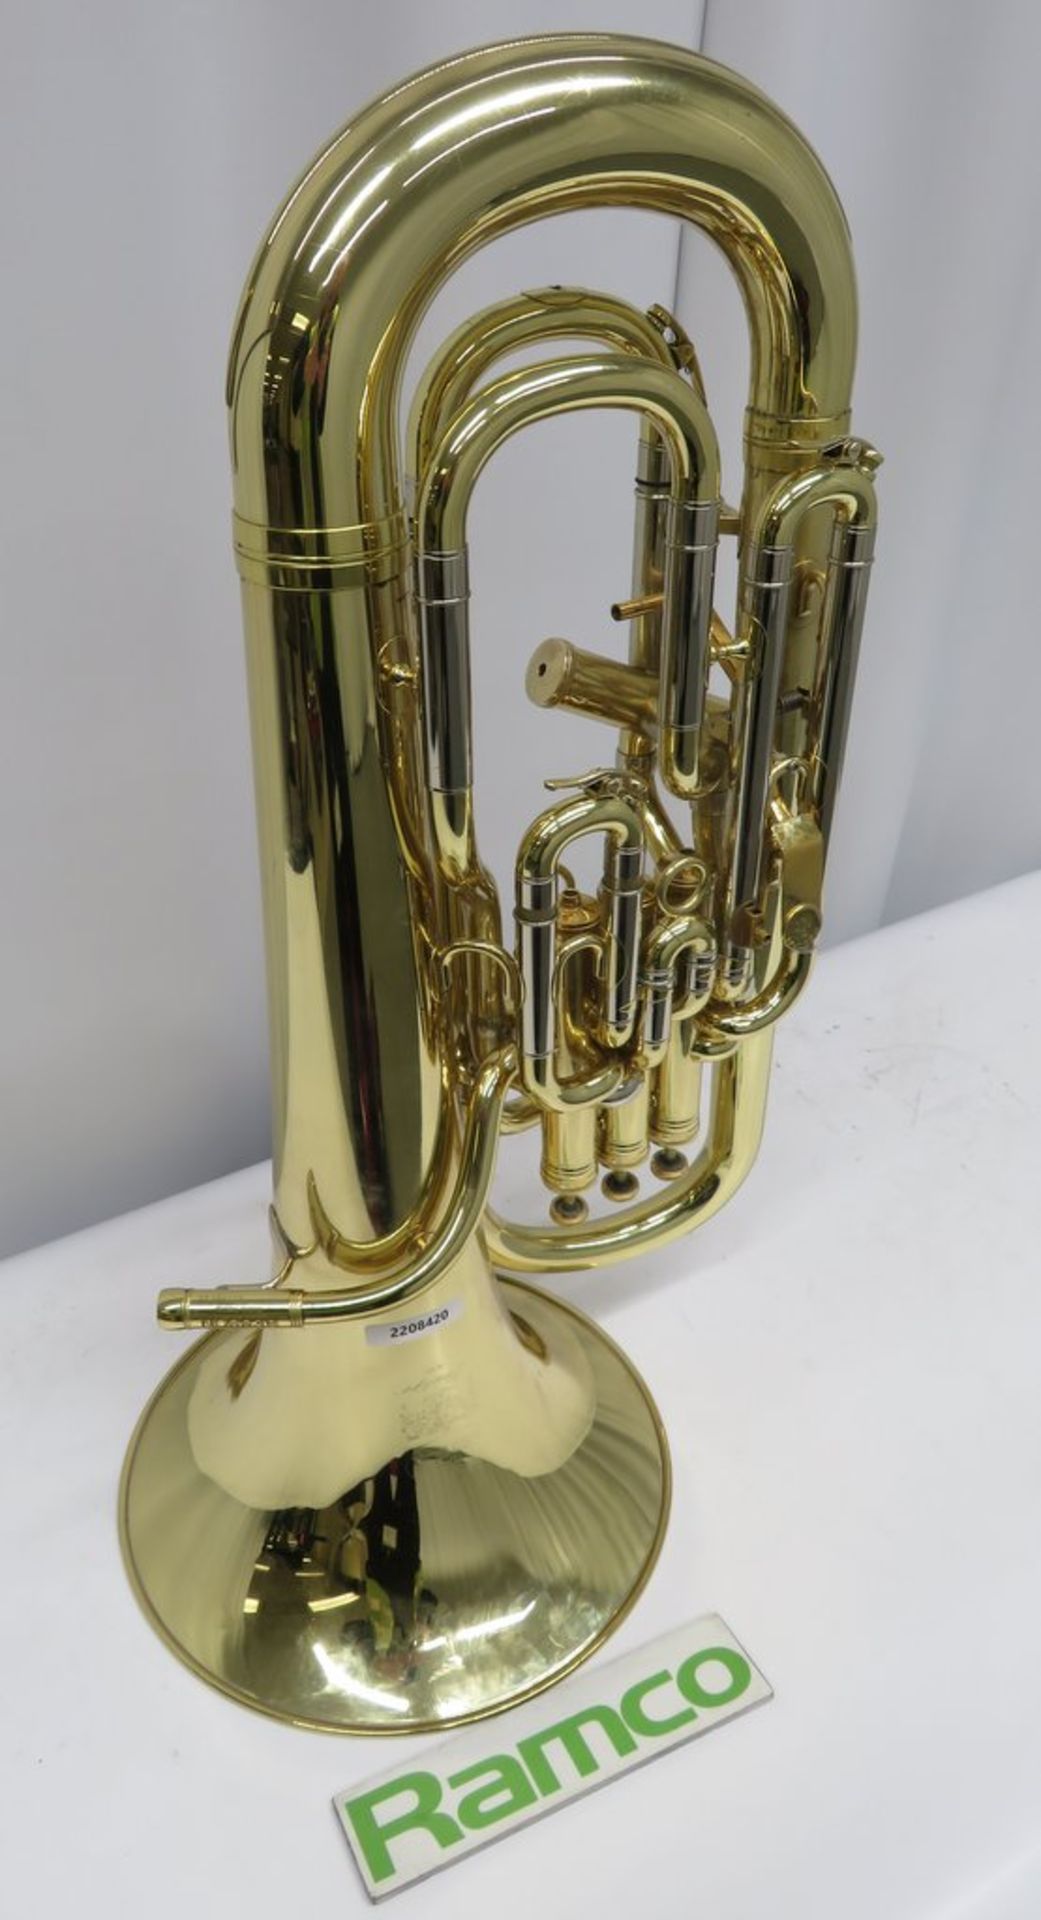 Besson Prestige BE2052 Euphonium With Case. Serial Number: 08300275. Please Note This Ite - Image 4 of 16